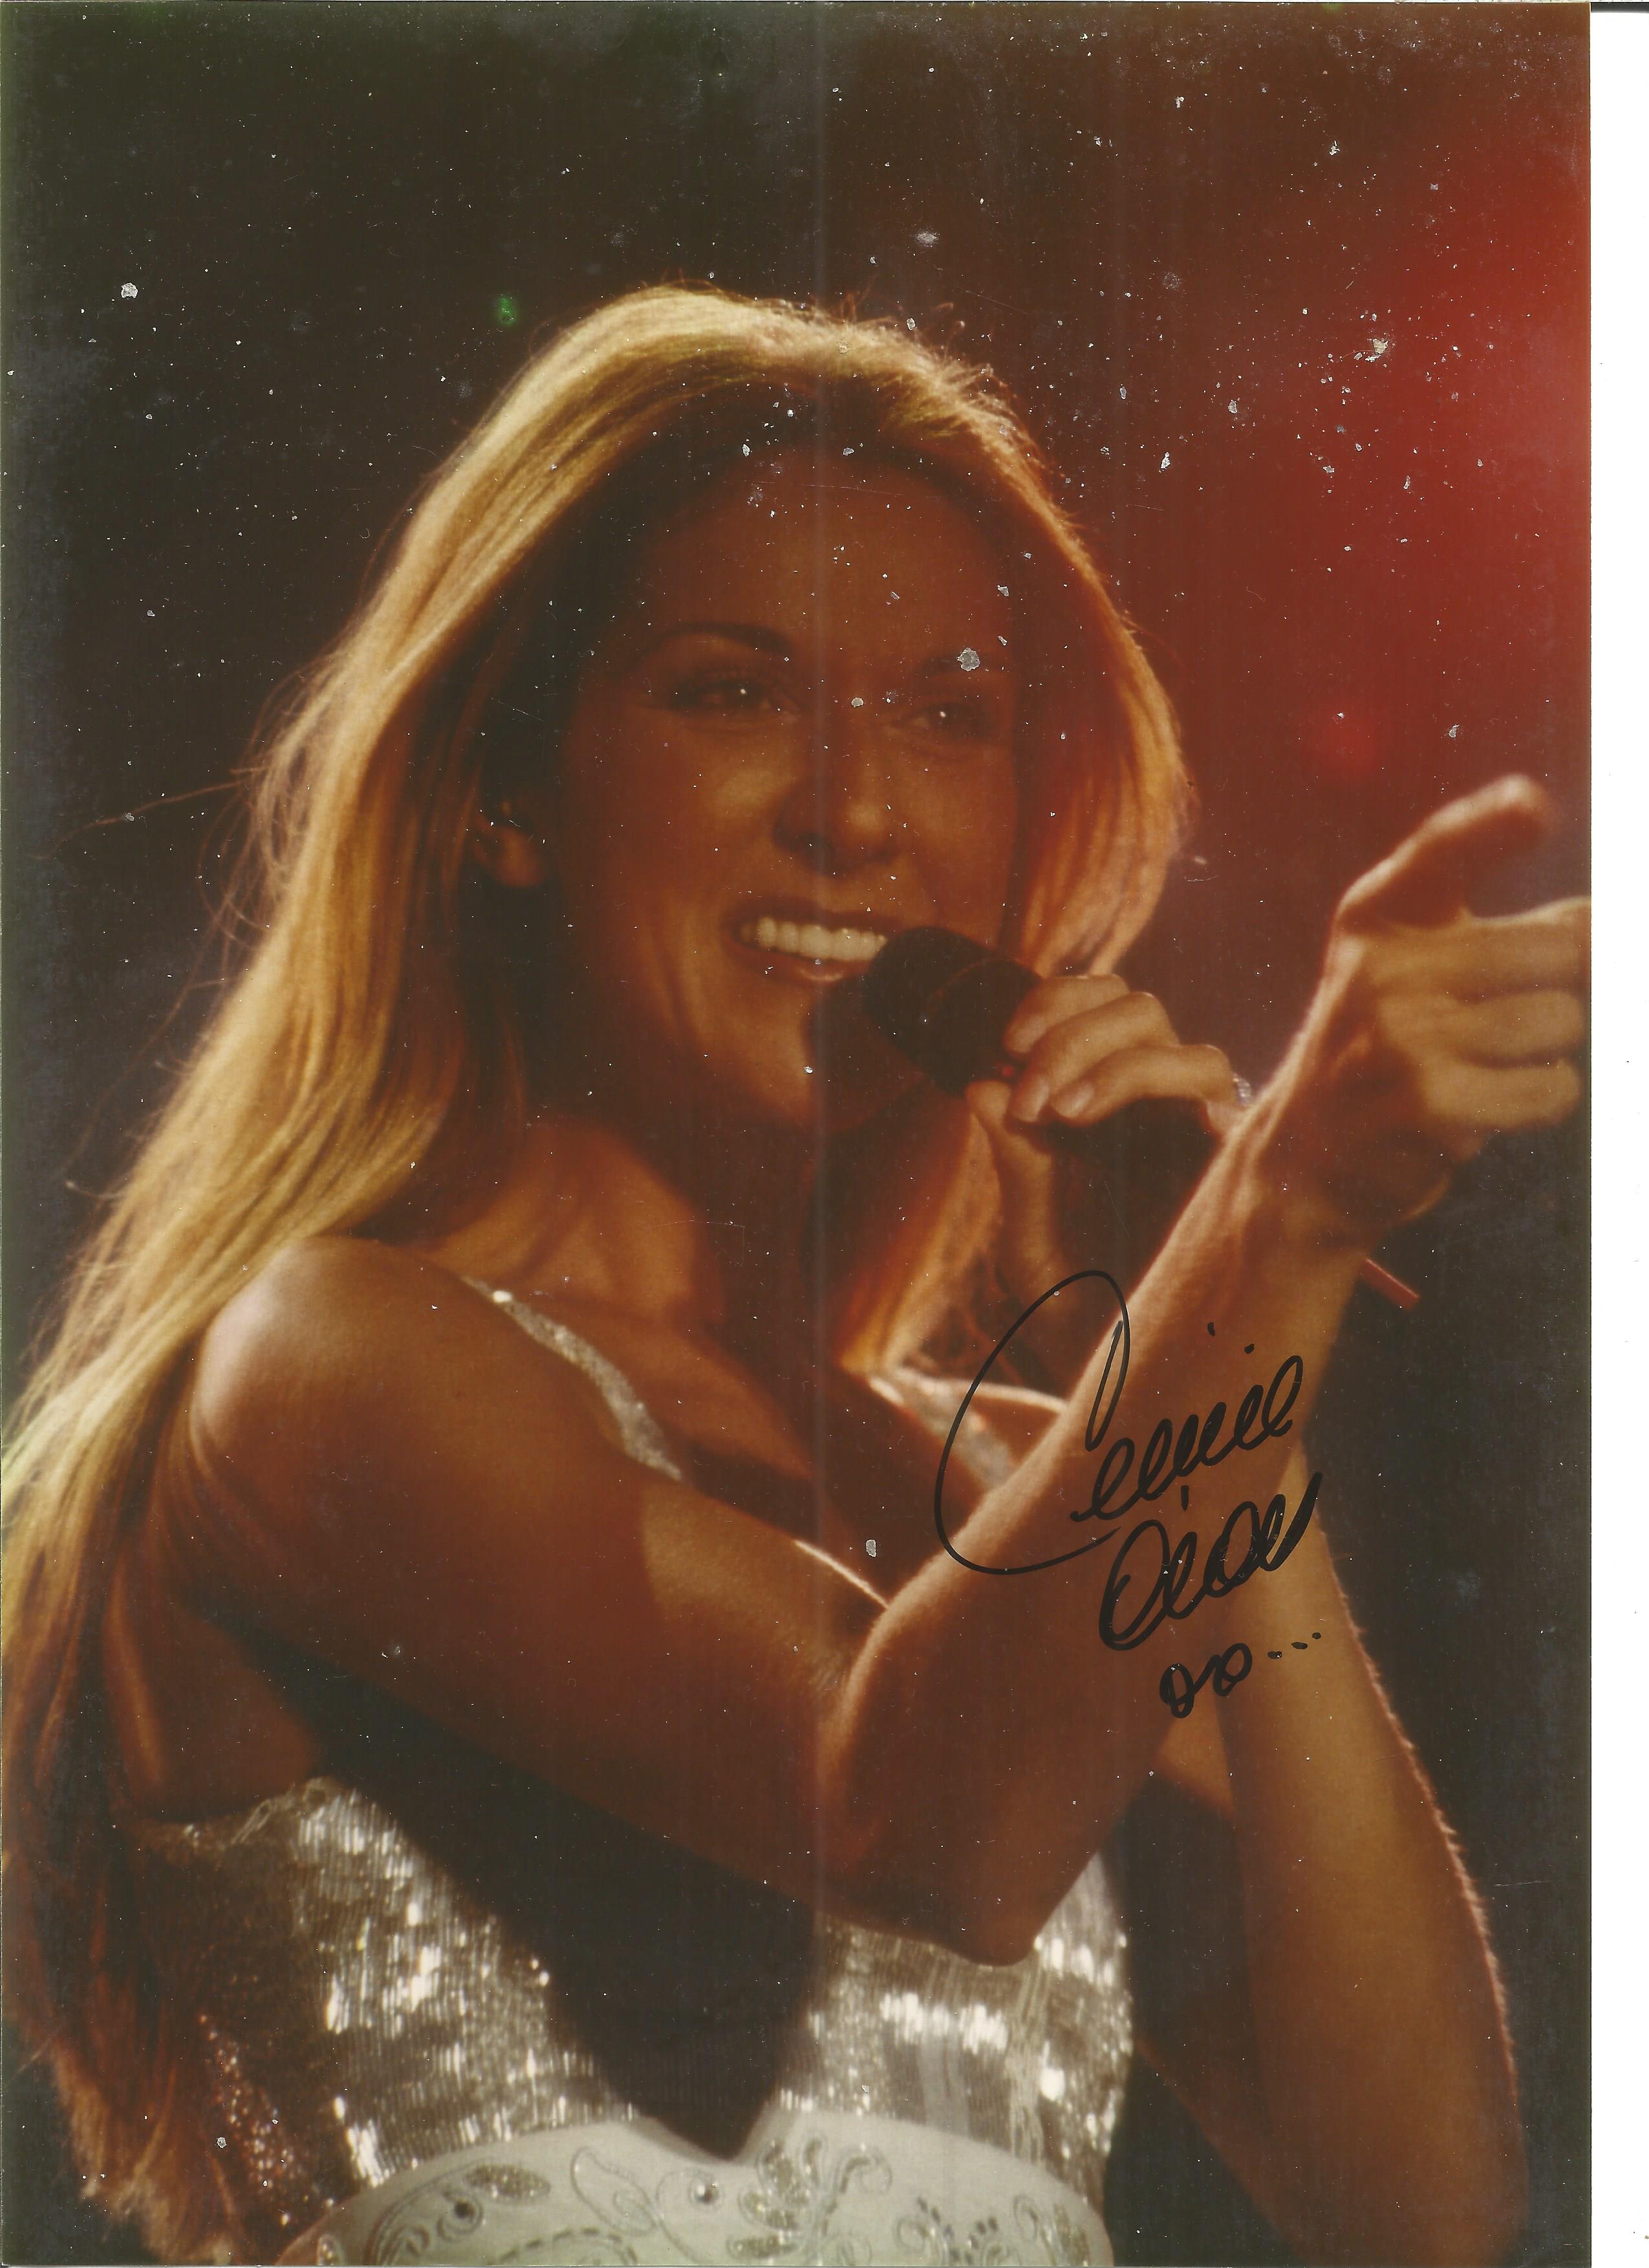 Celine Dion signed 11x8 colour photo. All autographs come with a Certificate of Authenticity. We